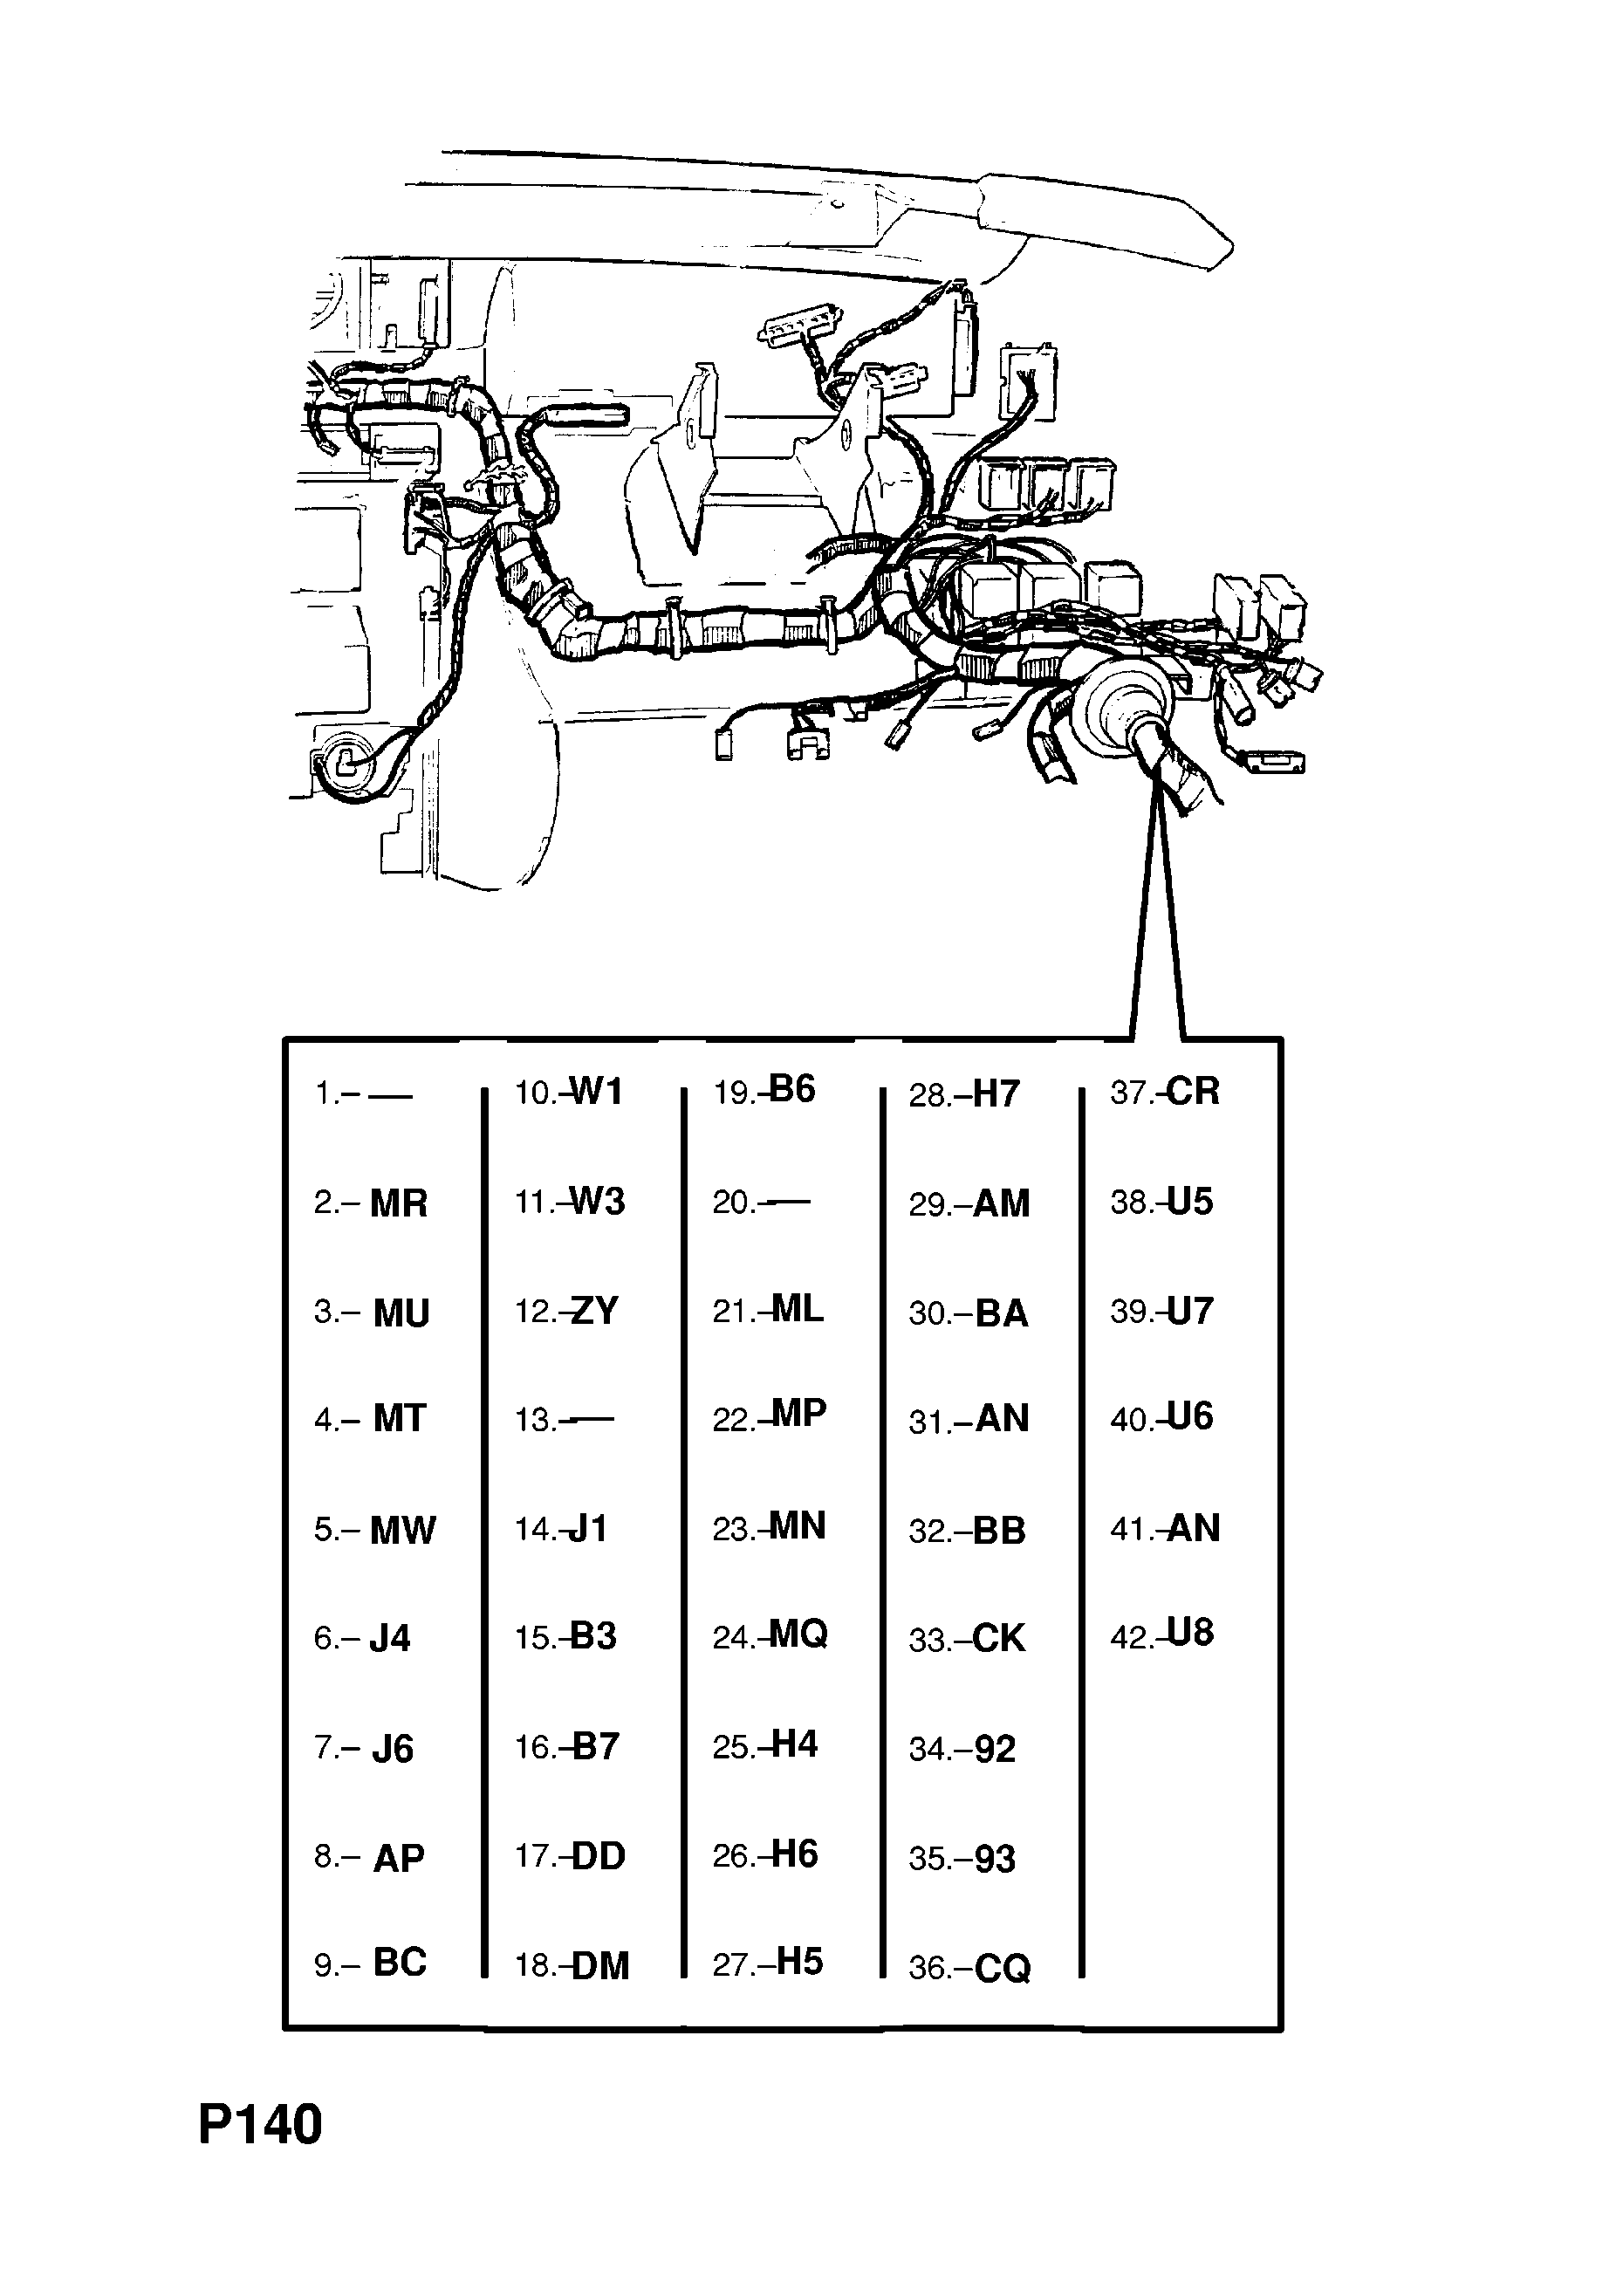 INSTRUMENT PANEL WIRING HARNESS (CONTD.) <small><i>[FOR AIR CONDITIONING AND AUTOMATIC TRANSMISSION EXCEPT LCD INSTRUMENTS]</i></small>